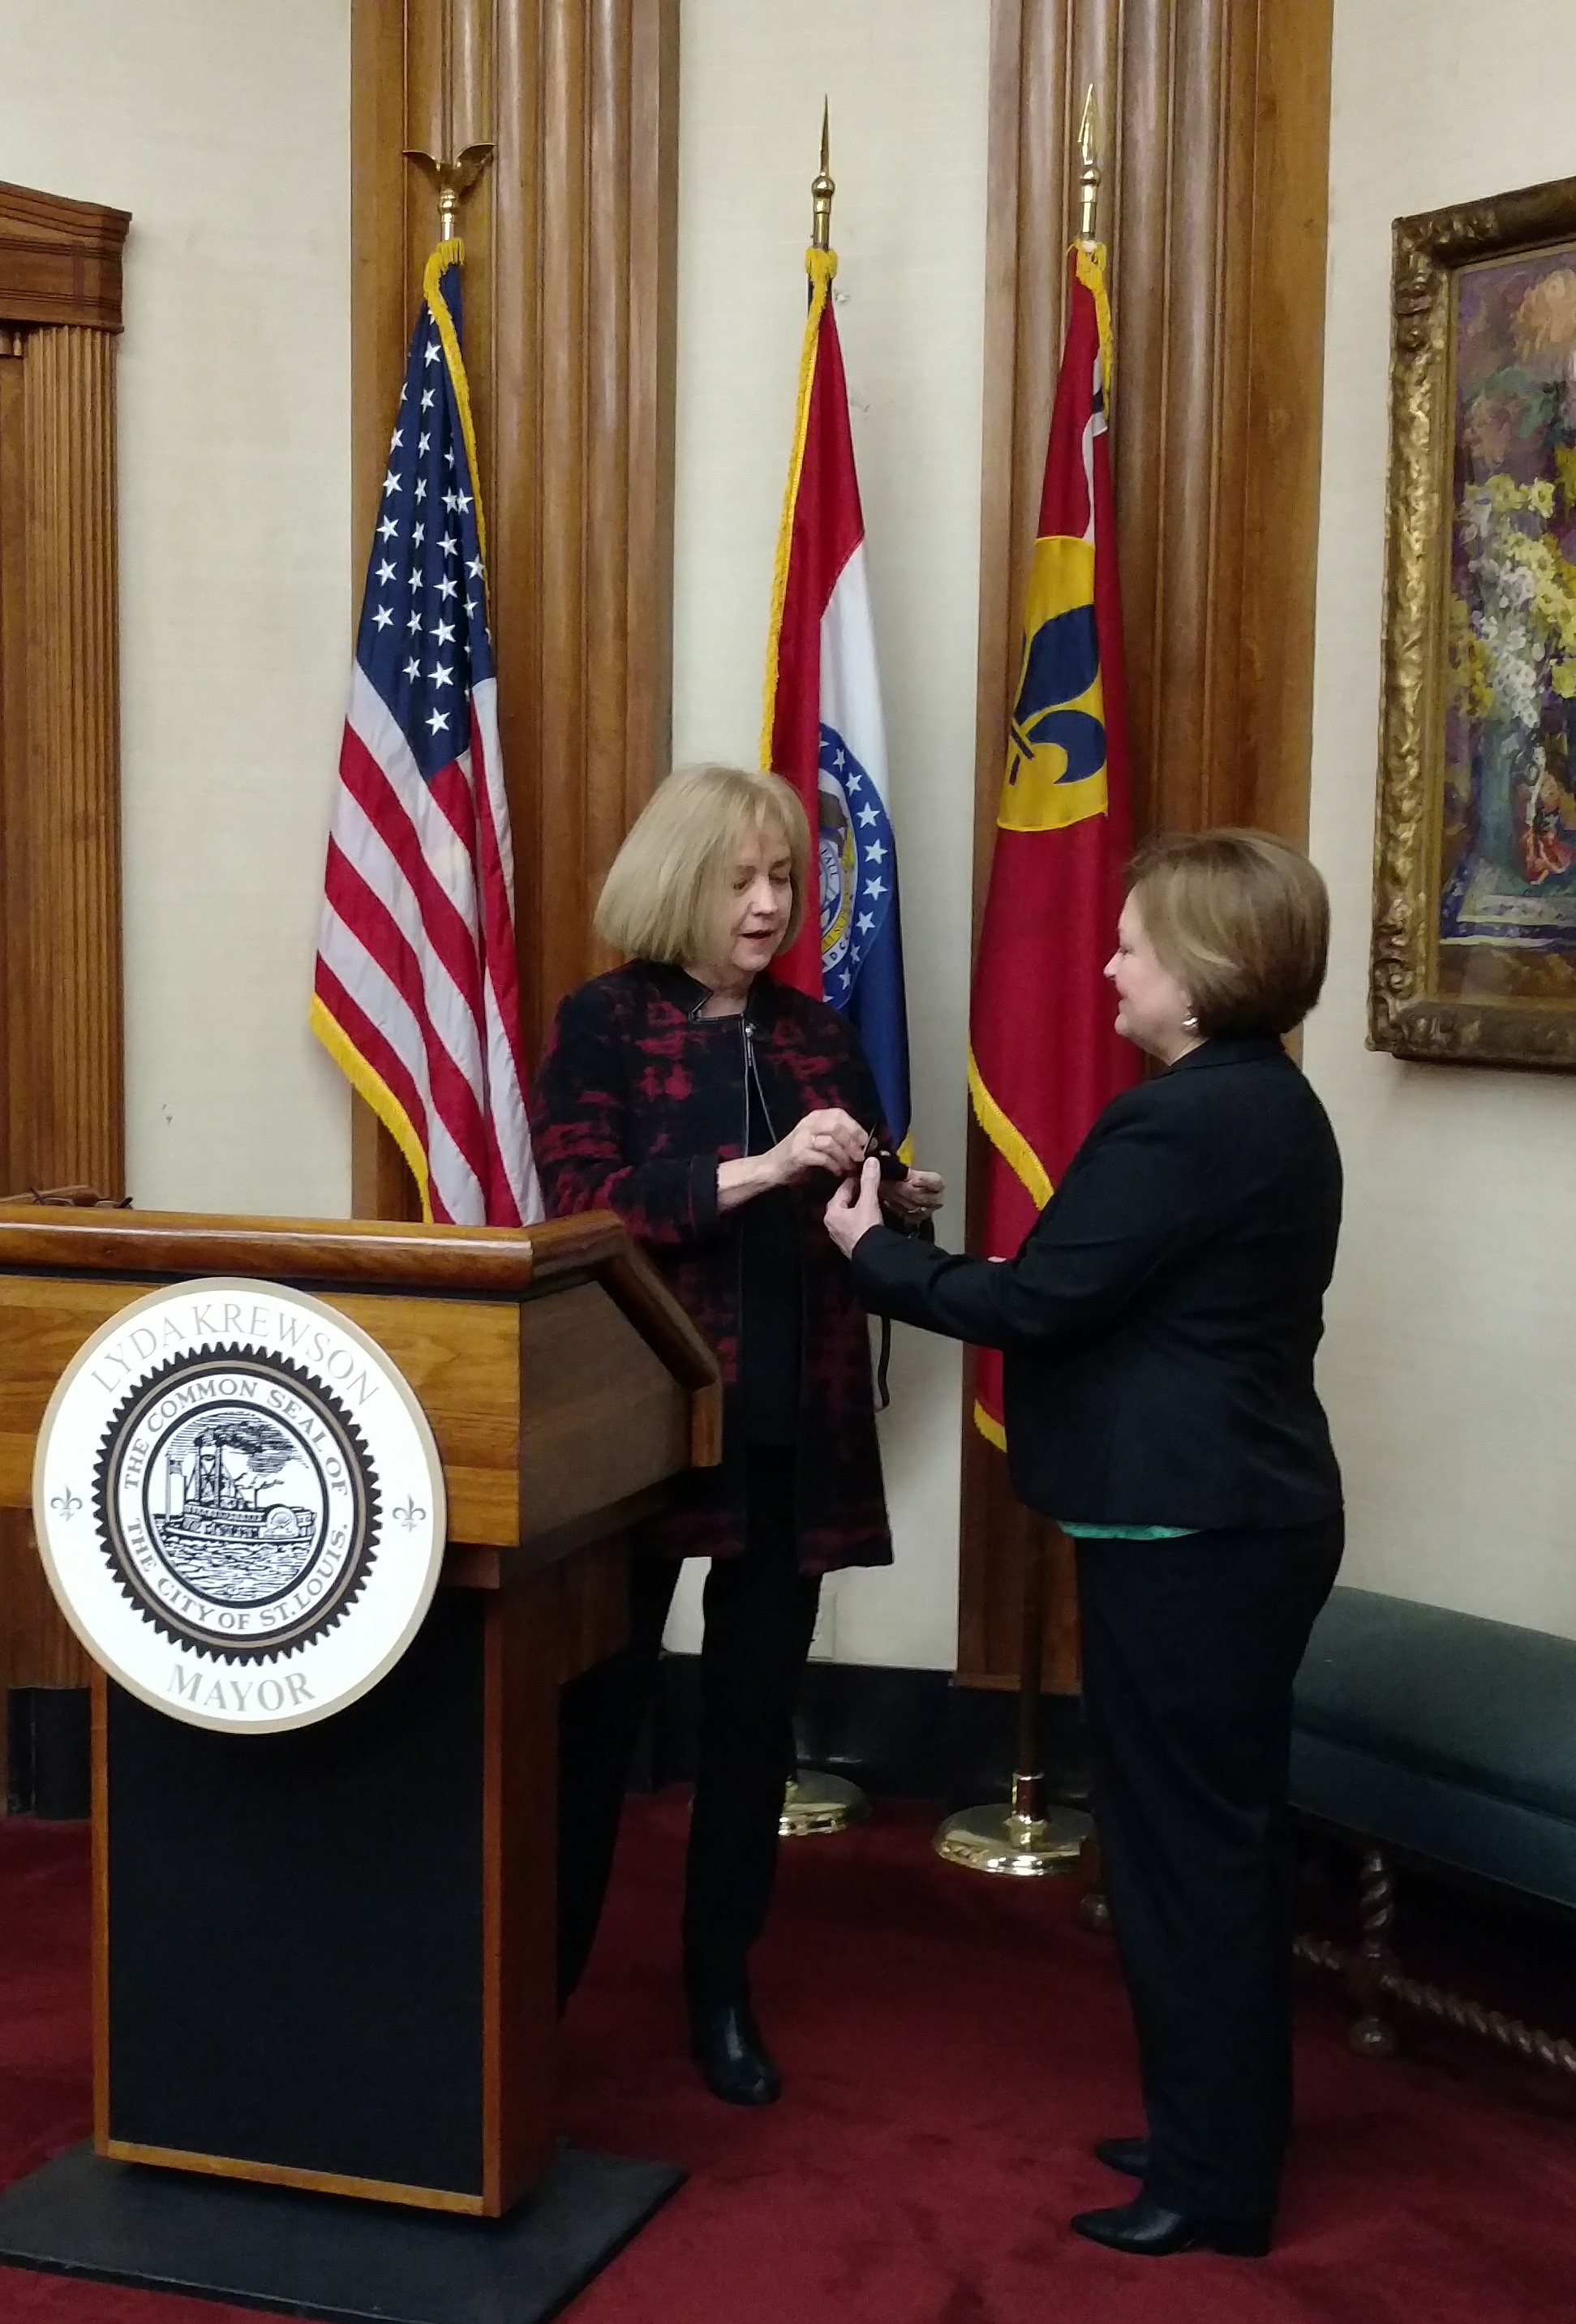 Beth Seright of the Comptroller's Office receives her 40-year service pin